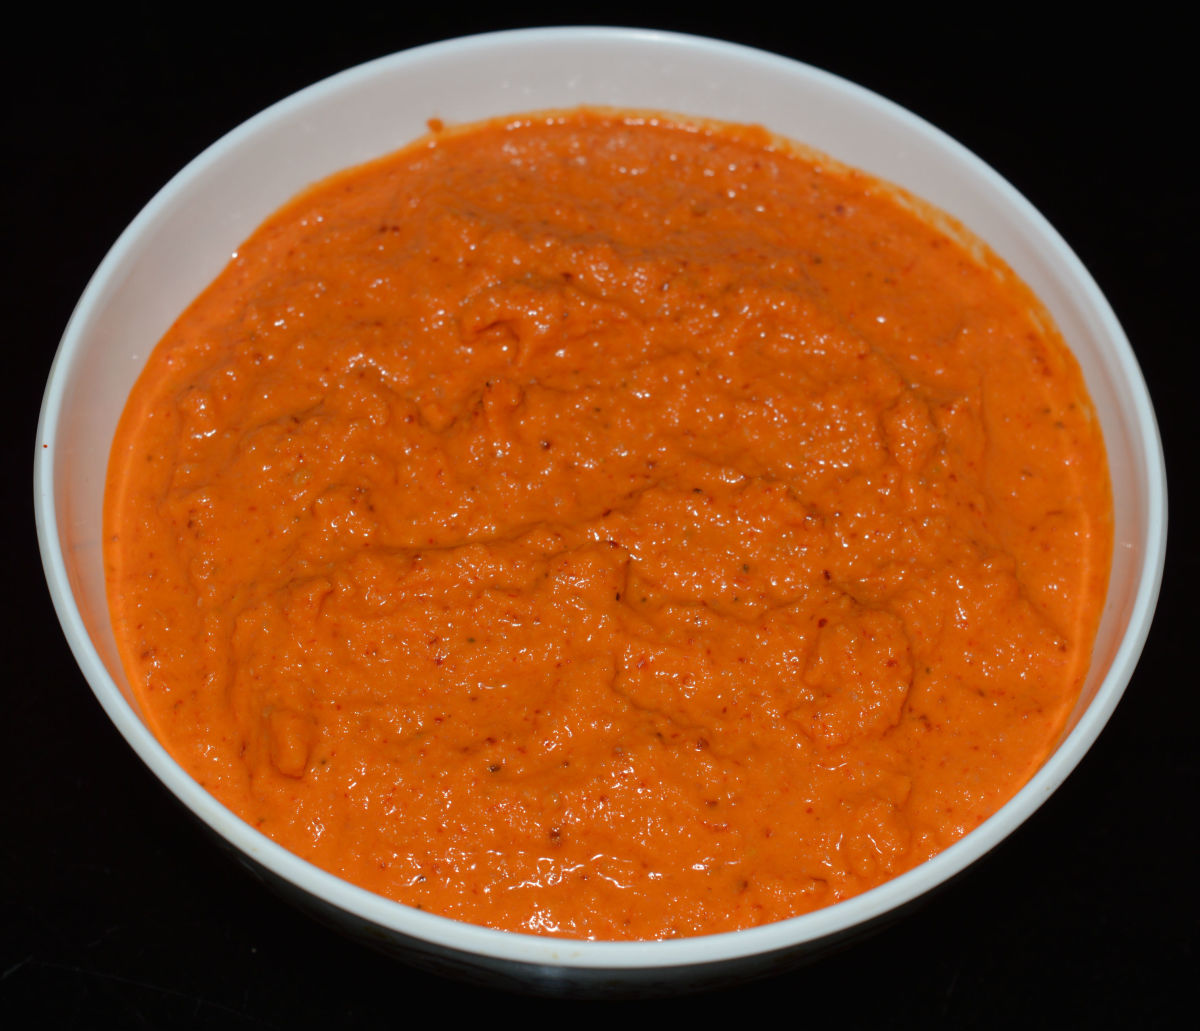 Serve this aromatic and delicious chutney with cooked rice, dosa, idly, or any other main course meal. Enjoy the taste!